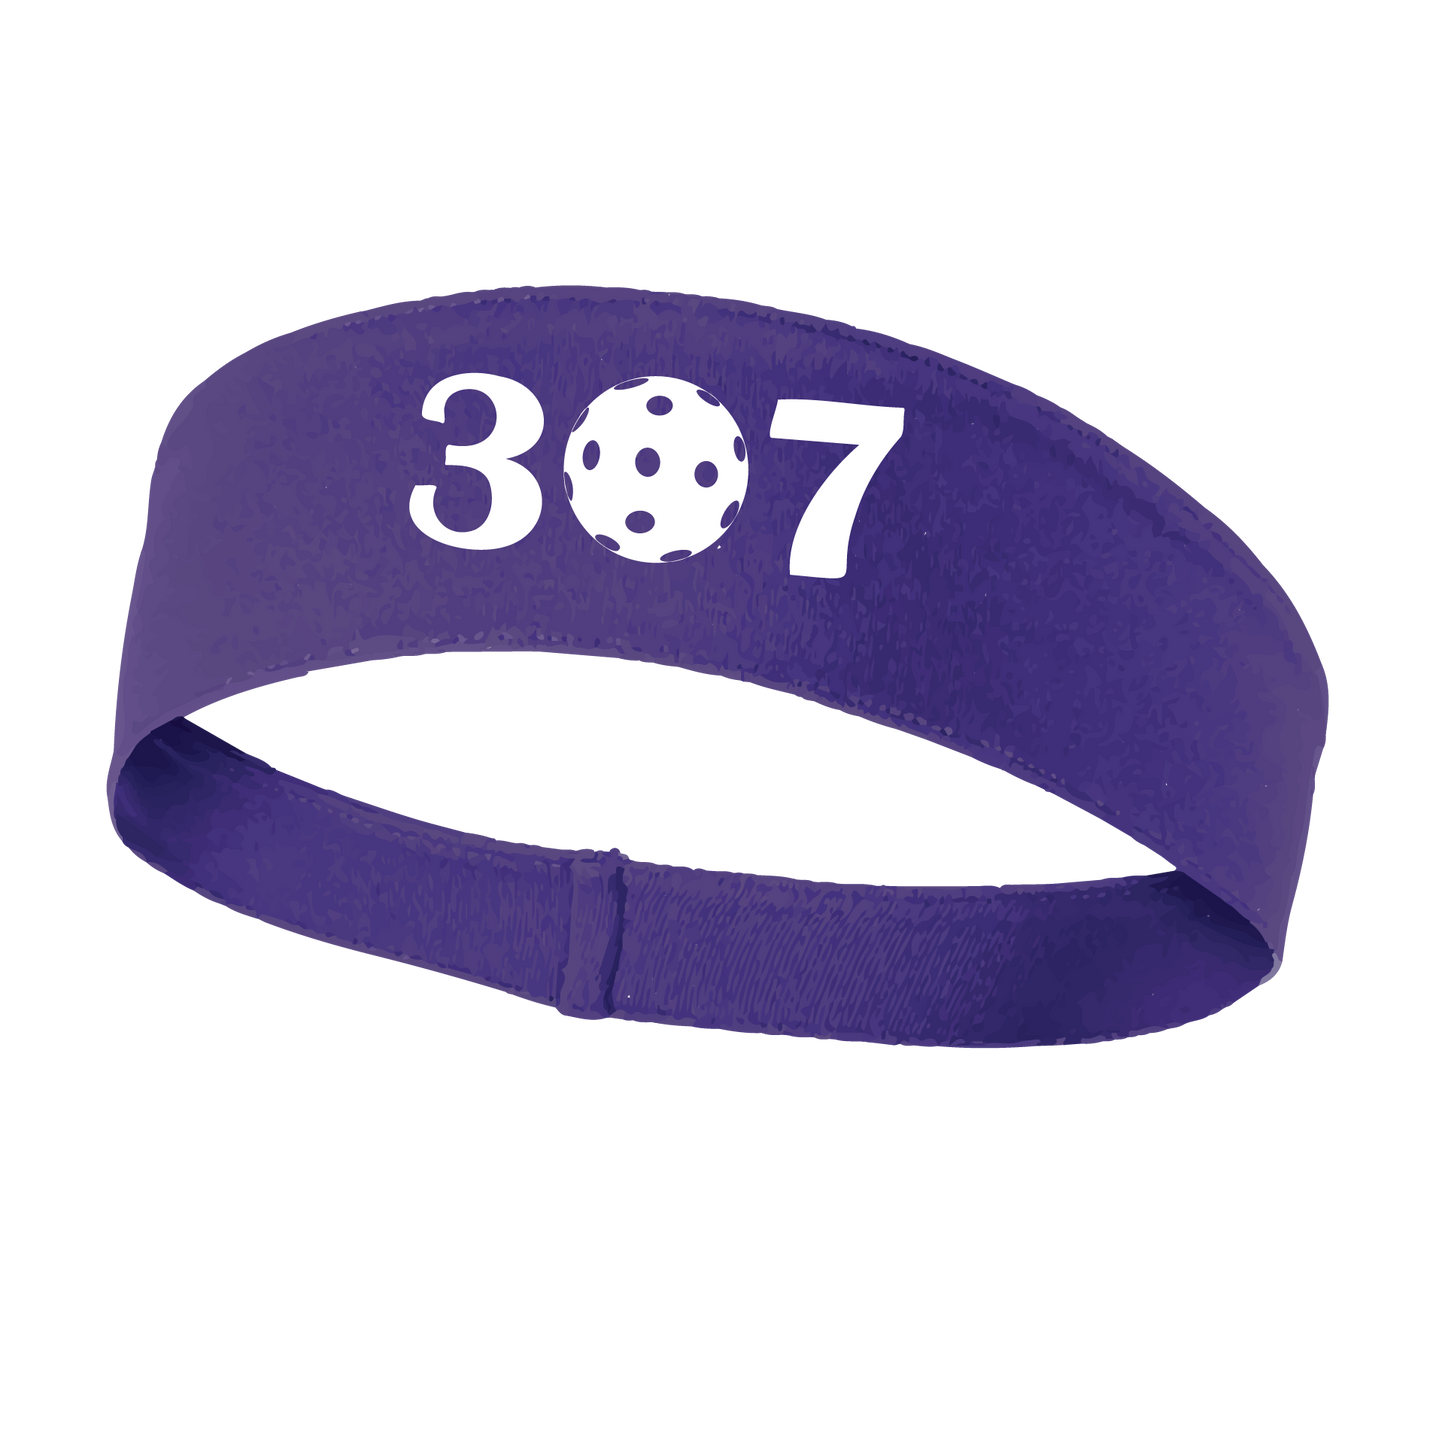 Design: 307 Wyoming Pickleball Club  This fun, pickleball designed, moisture-wicking headband narrows in the back to fit more securely. Single-needle top-stitched edging. These headbands come in a variety of colors. Truly shows your love for the sport of pickleball!!